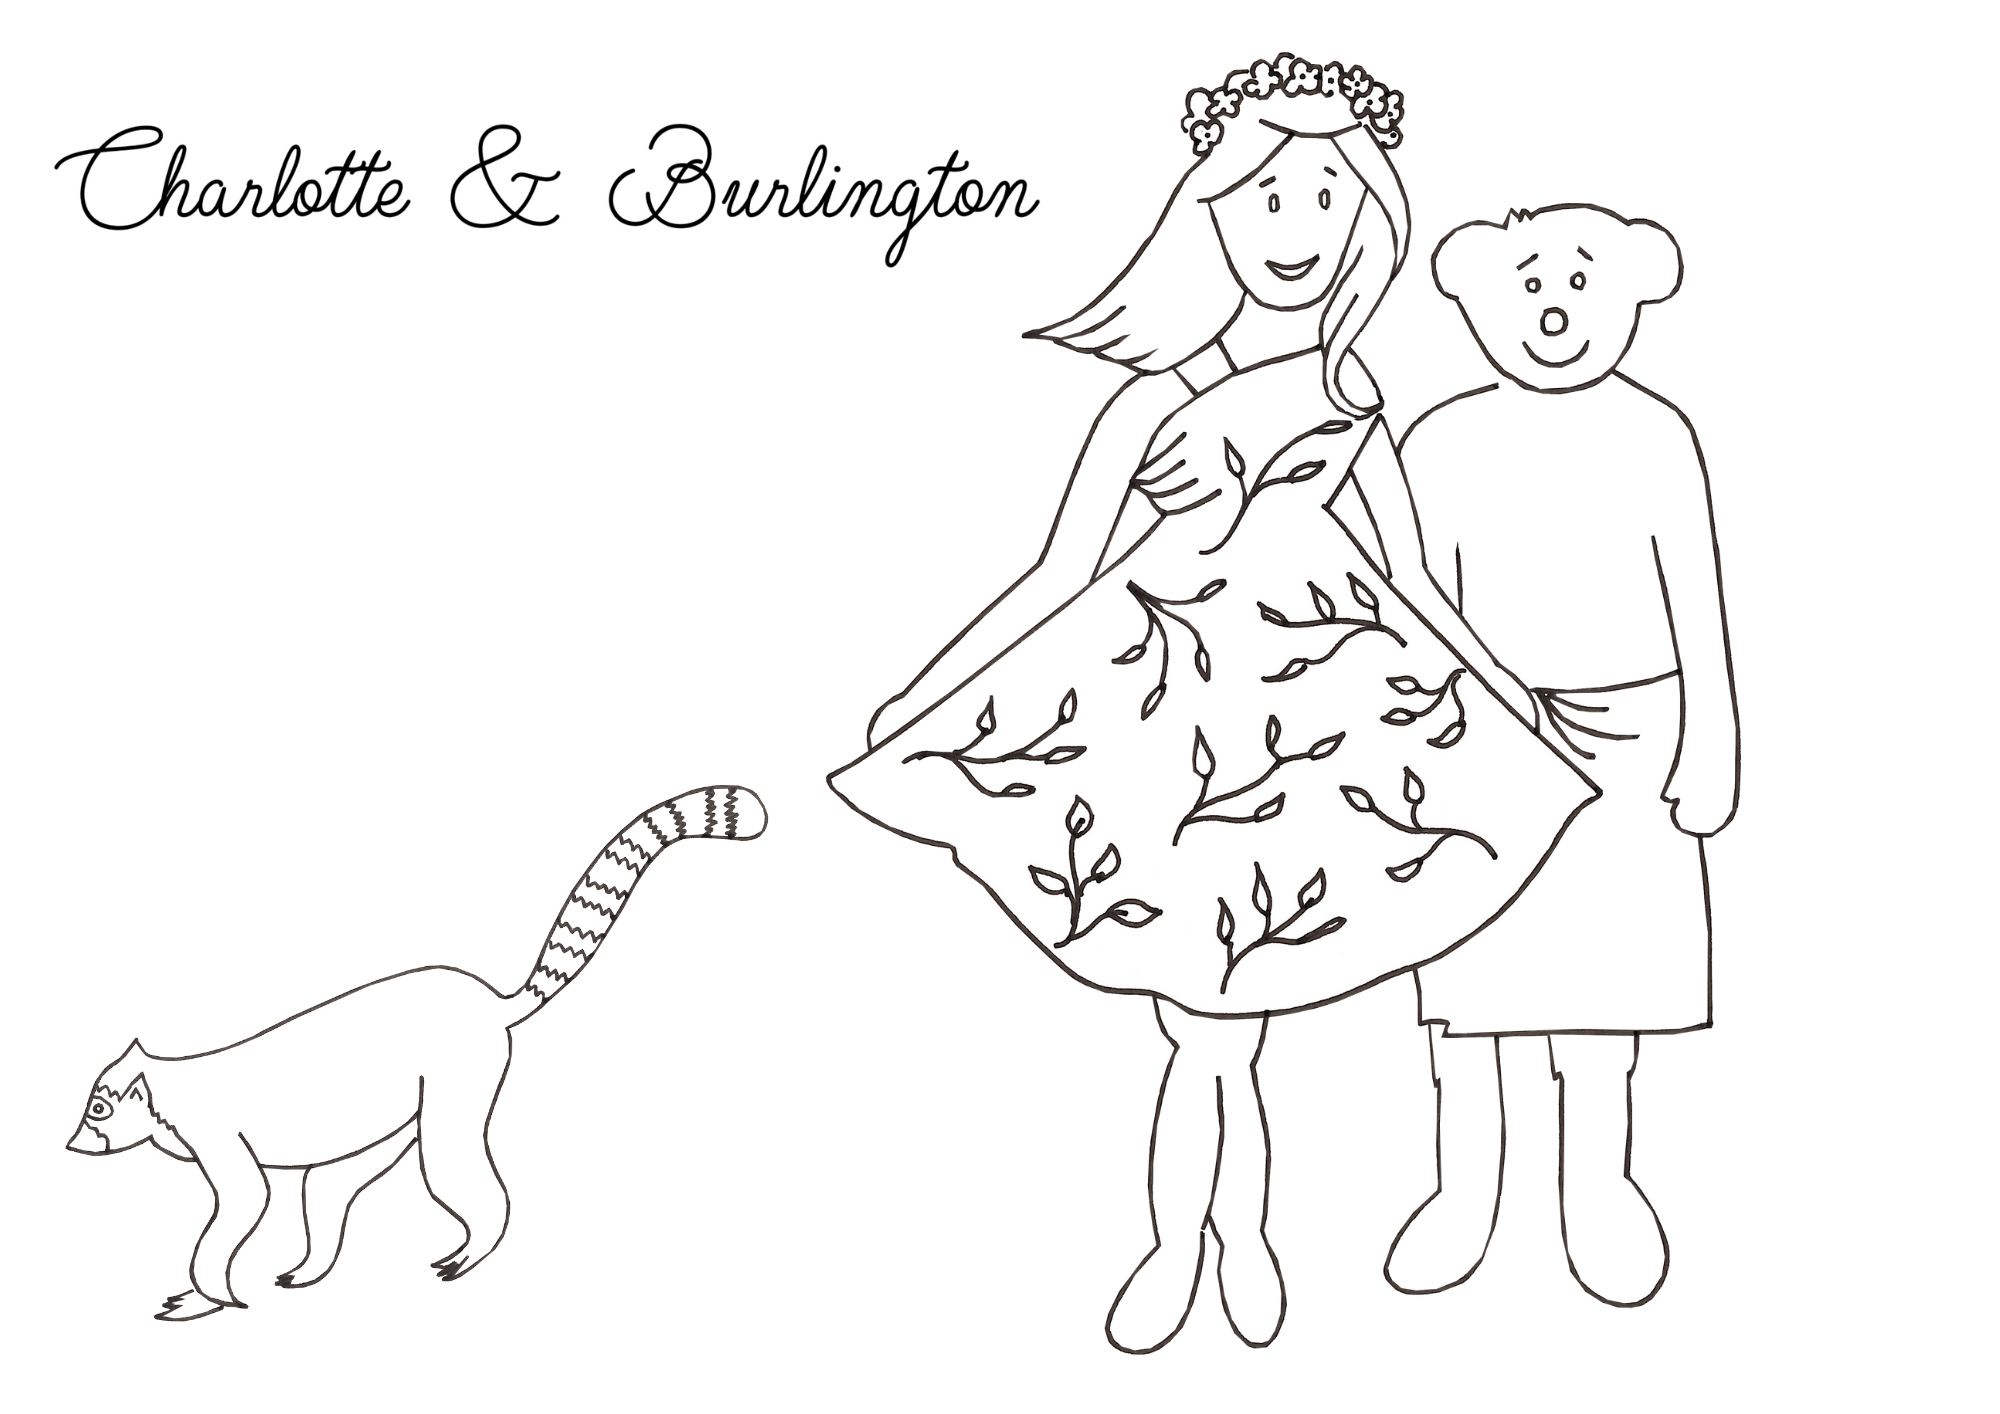 Free downloadable printable colouring in for children doll and bear Charlotte and Burlington French family club